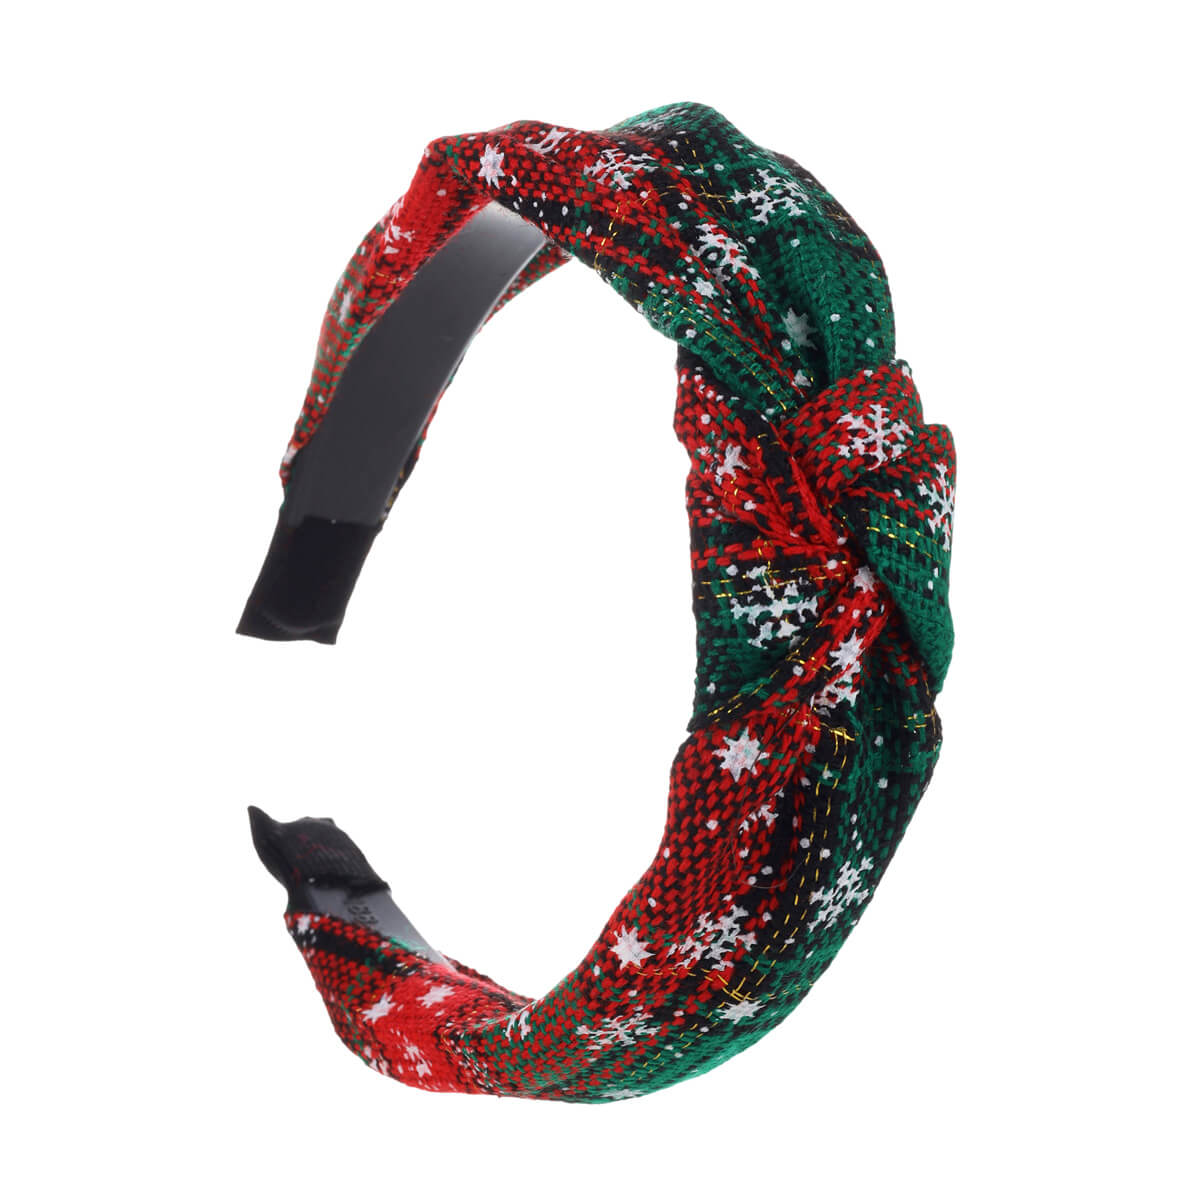 Knotted Christmas hairband